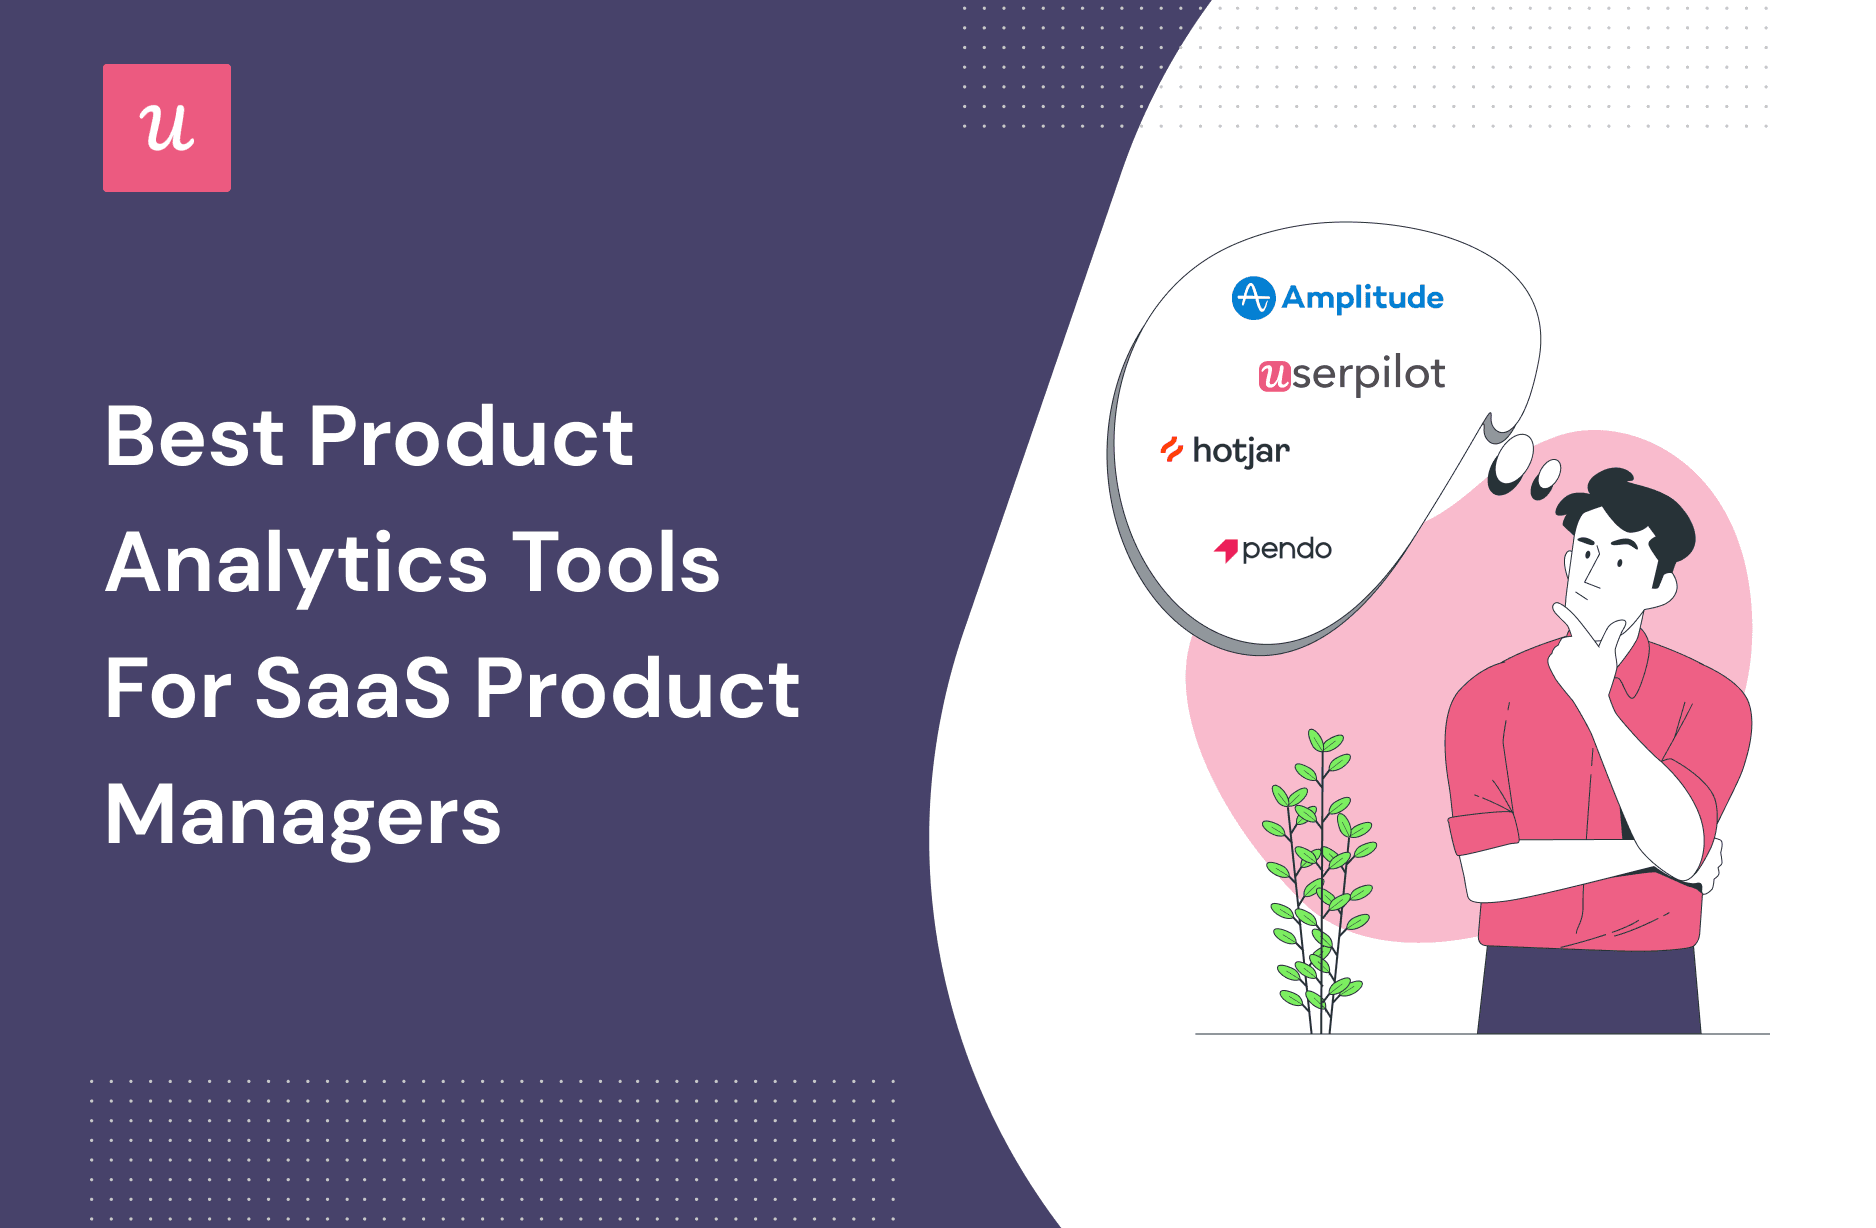 Best Product Analytics Tools For SaaS Product Managers cover